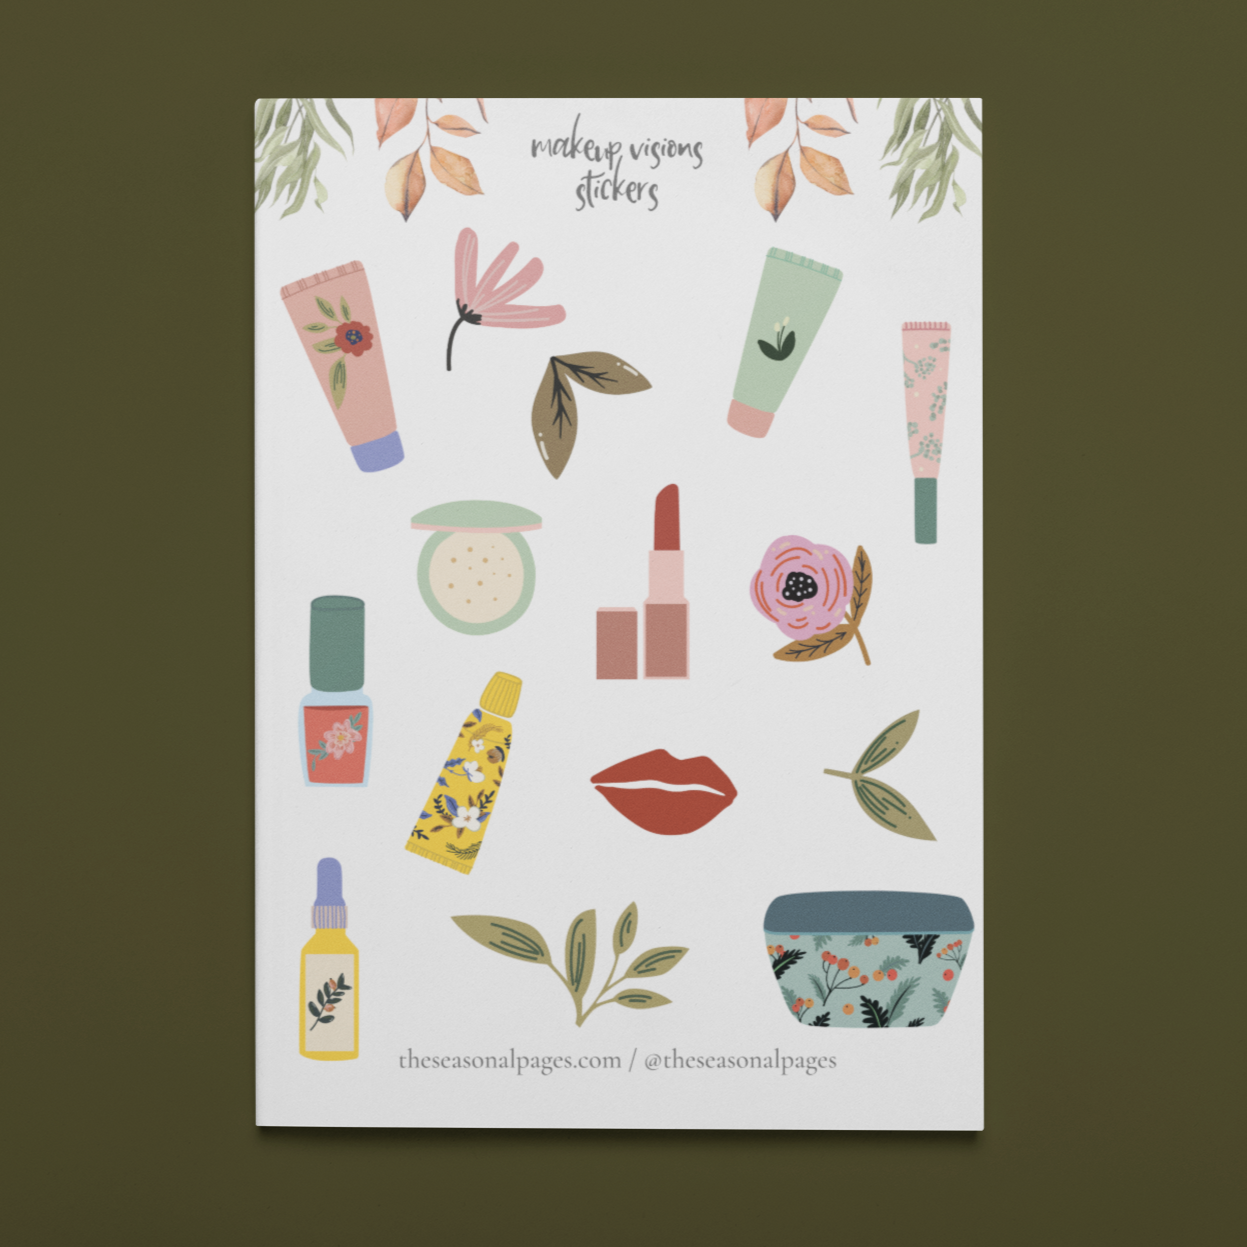 Printable Makeup Visions Sticker Set – The Seasonal Pages